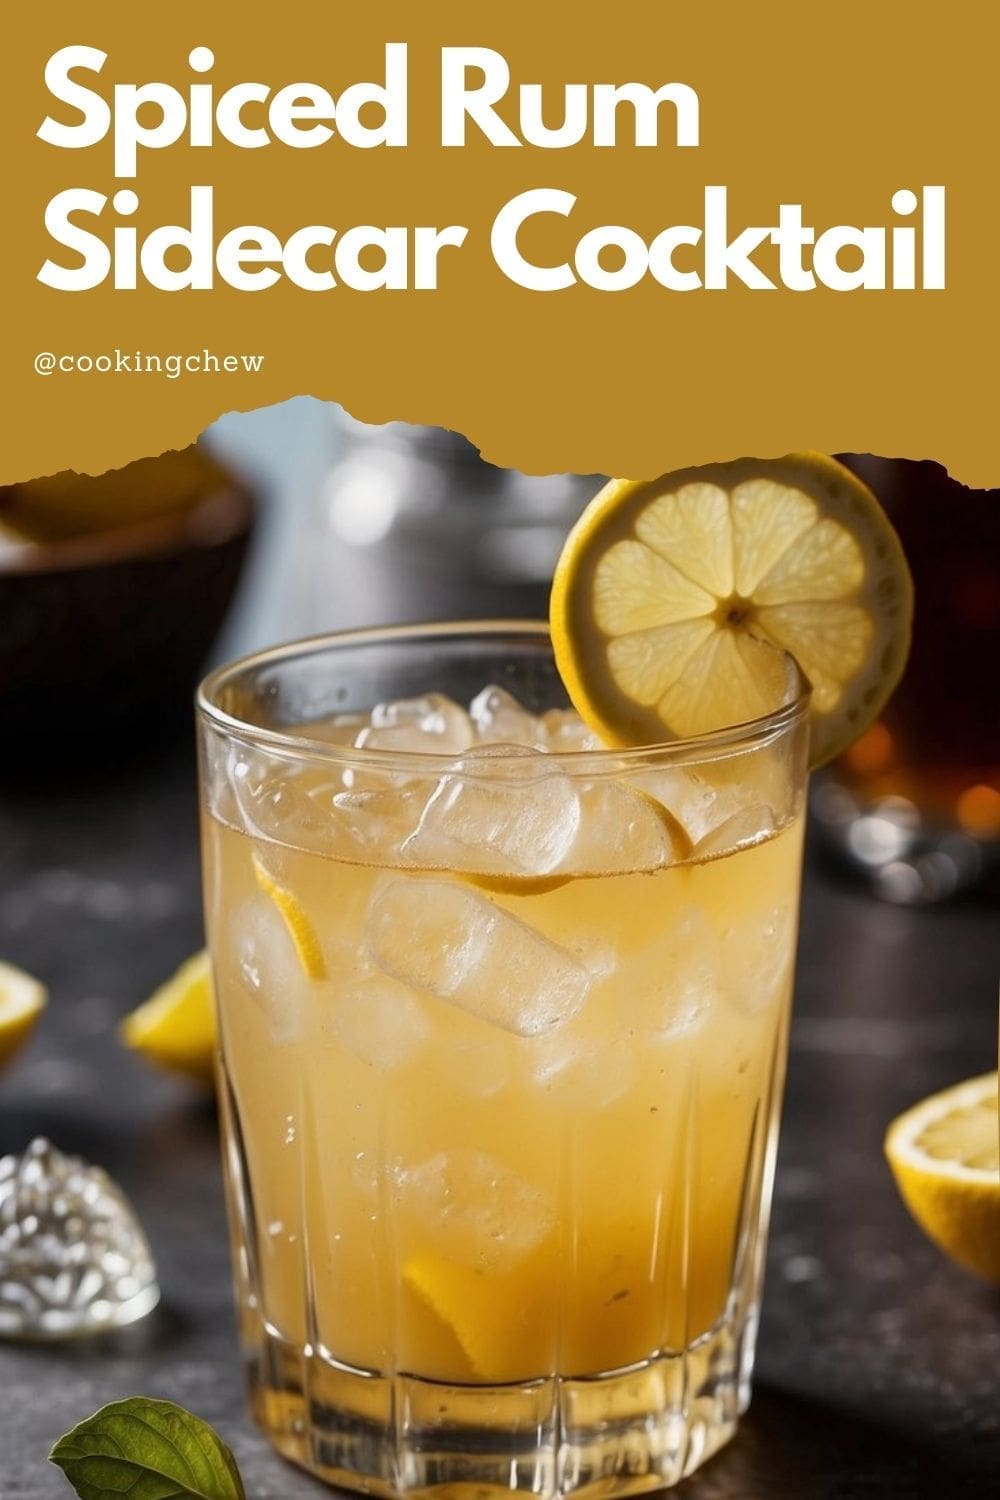 A spiced rum sidecar cocktail in a coupe glass with a lemon garnish.